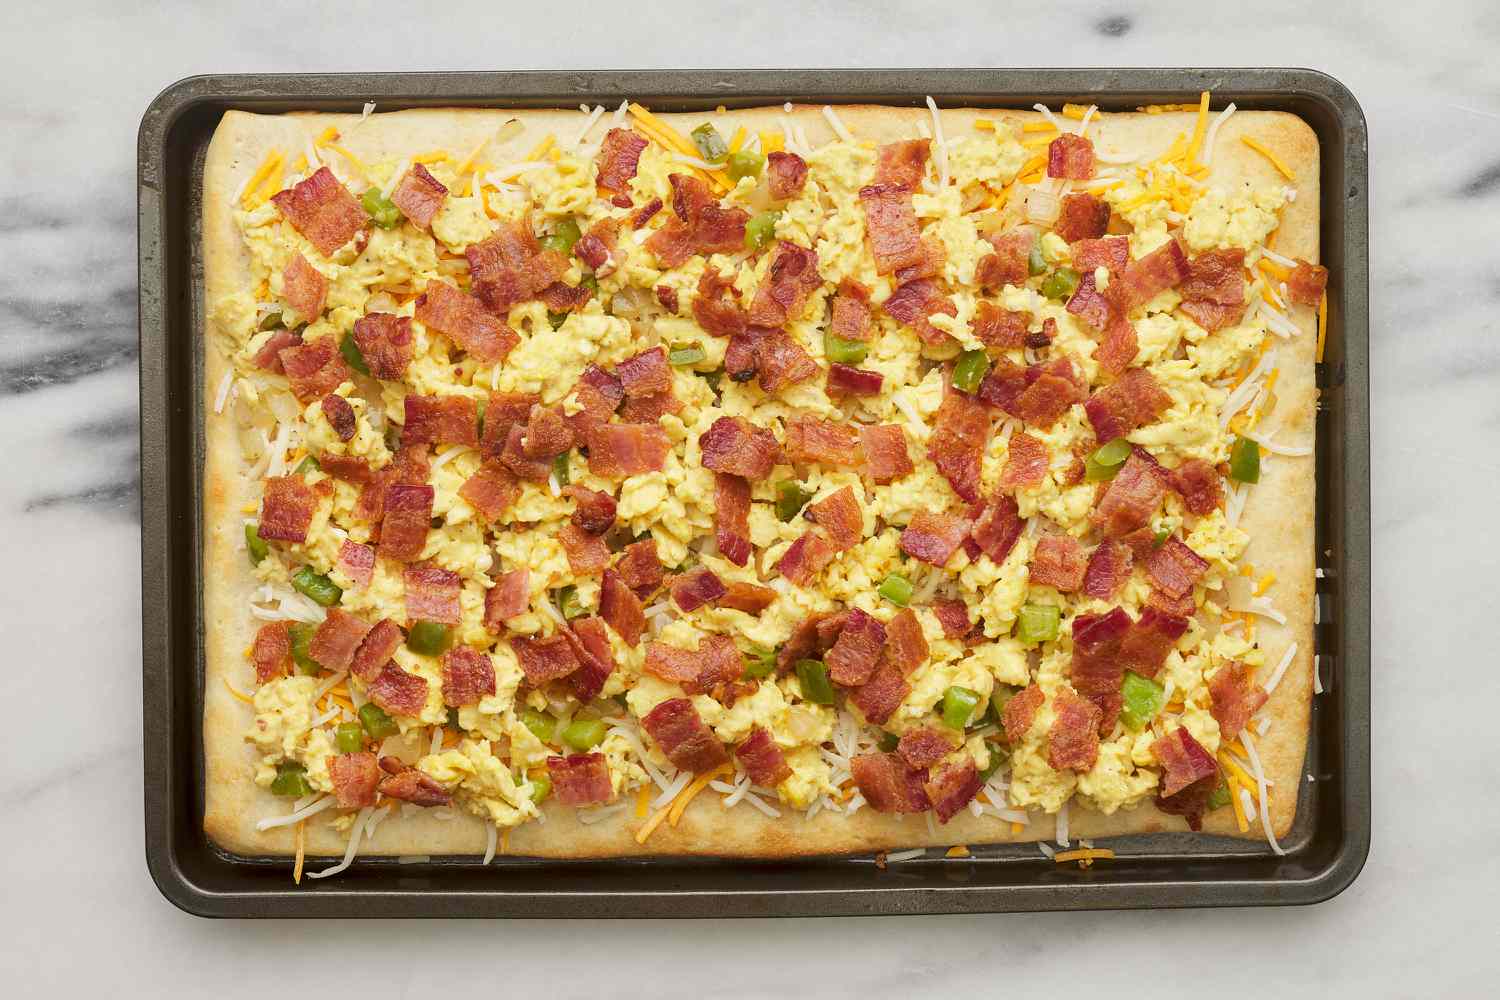 eggs, peppers, onion, cheese and bacon on pre-baked pizza crust in sheet pan